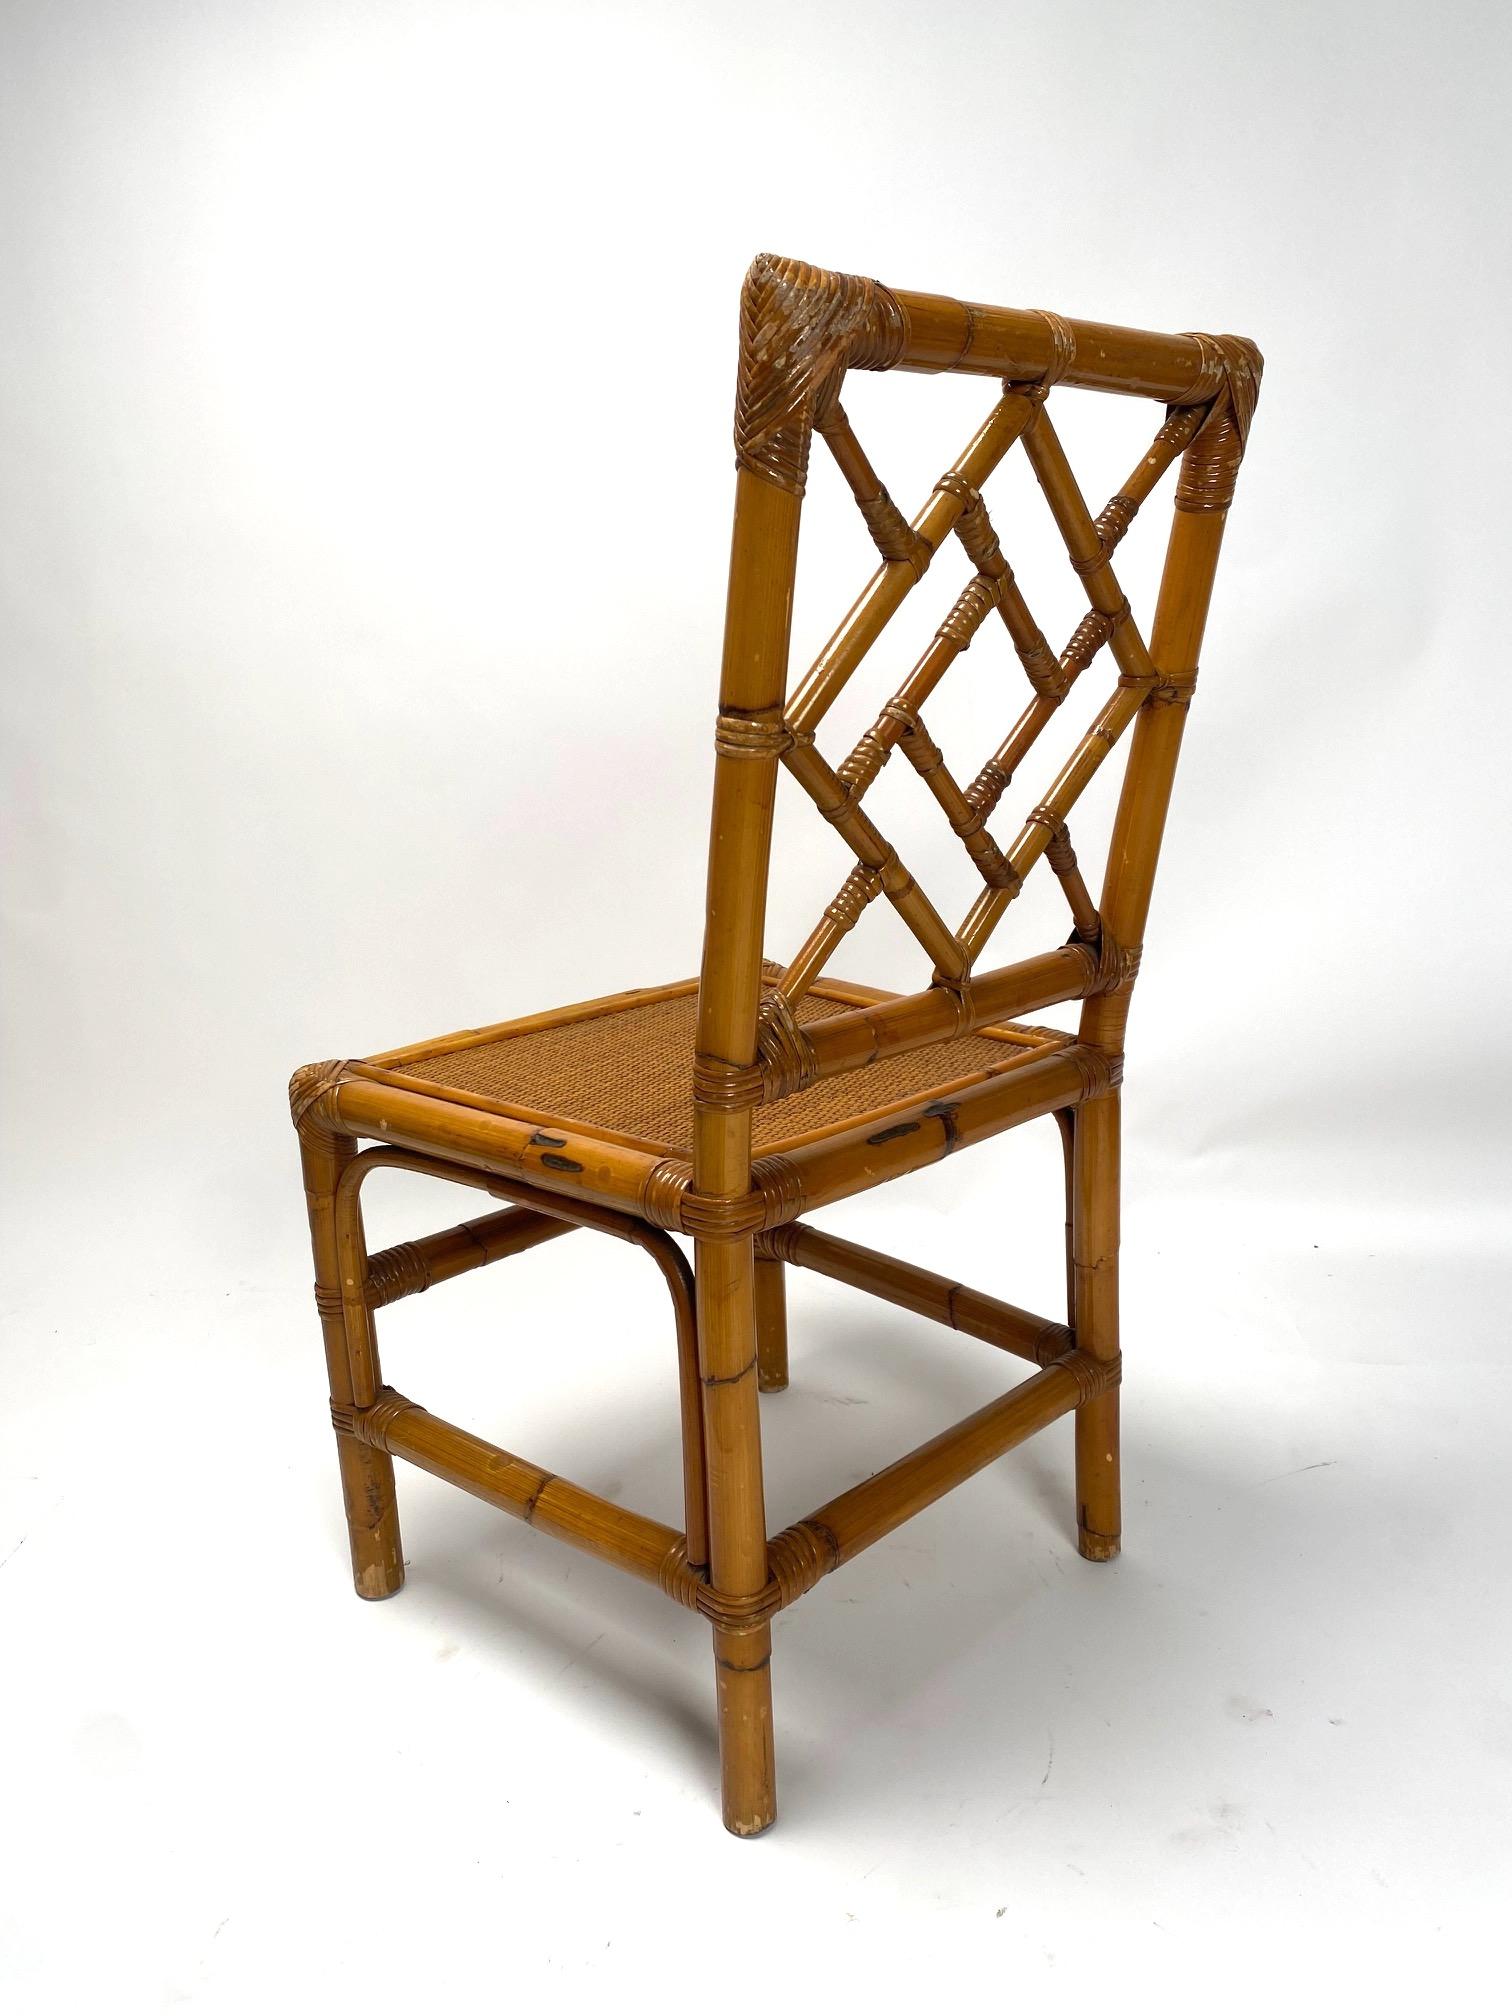 Italian Set of 4 Bamboo chairs by Vivai del Sud, Italy, 1970s